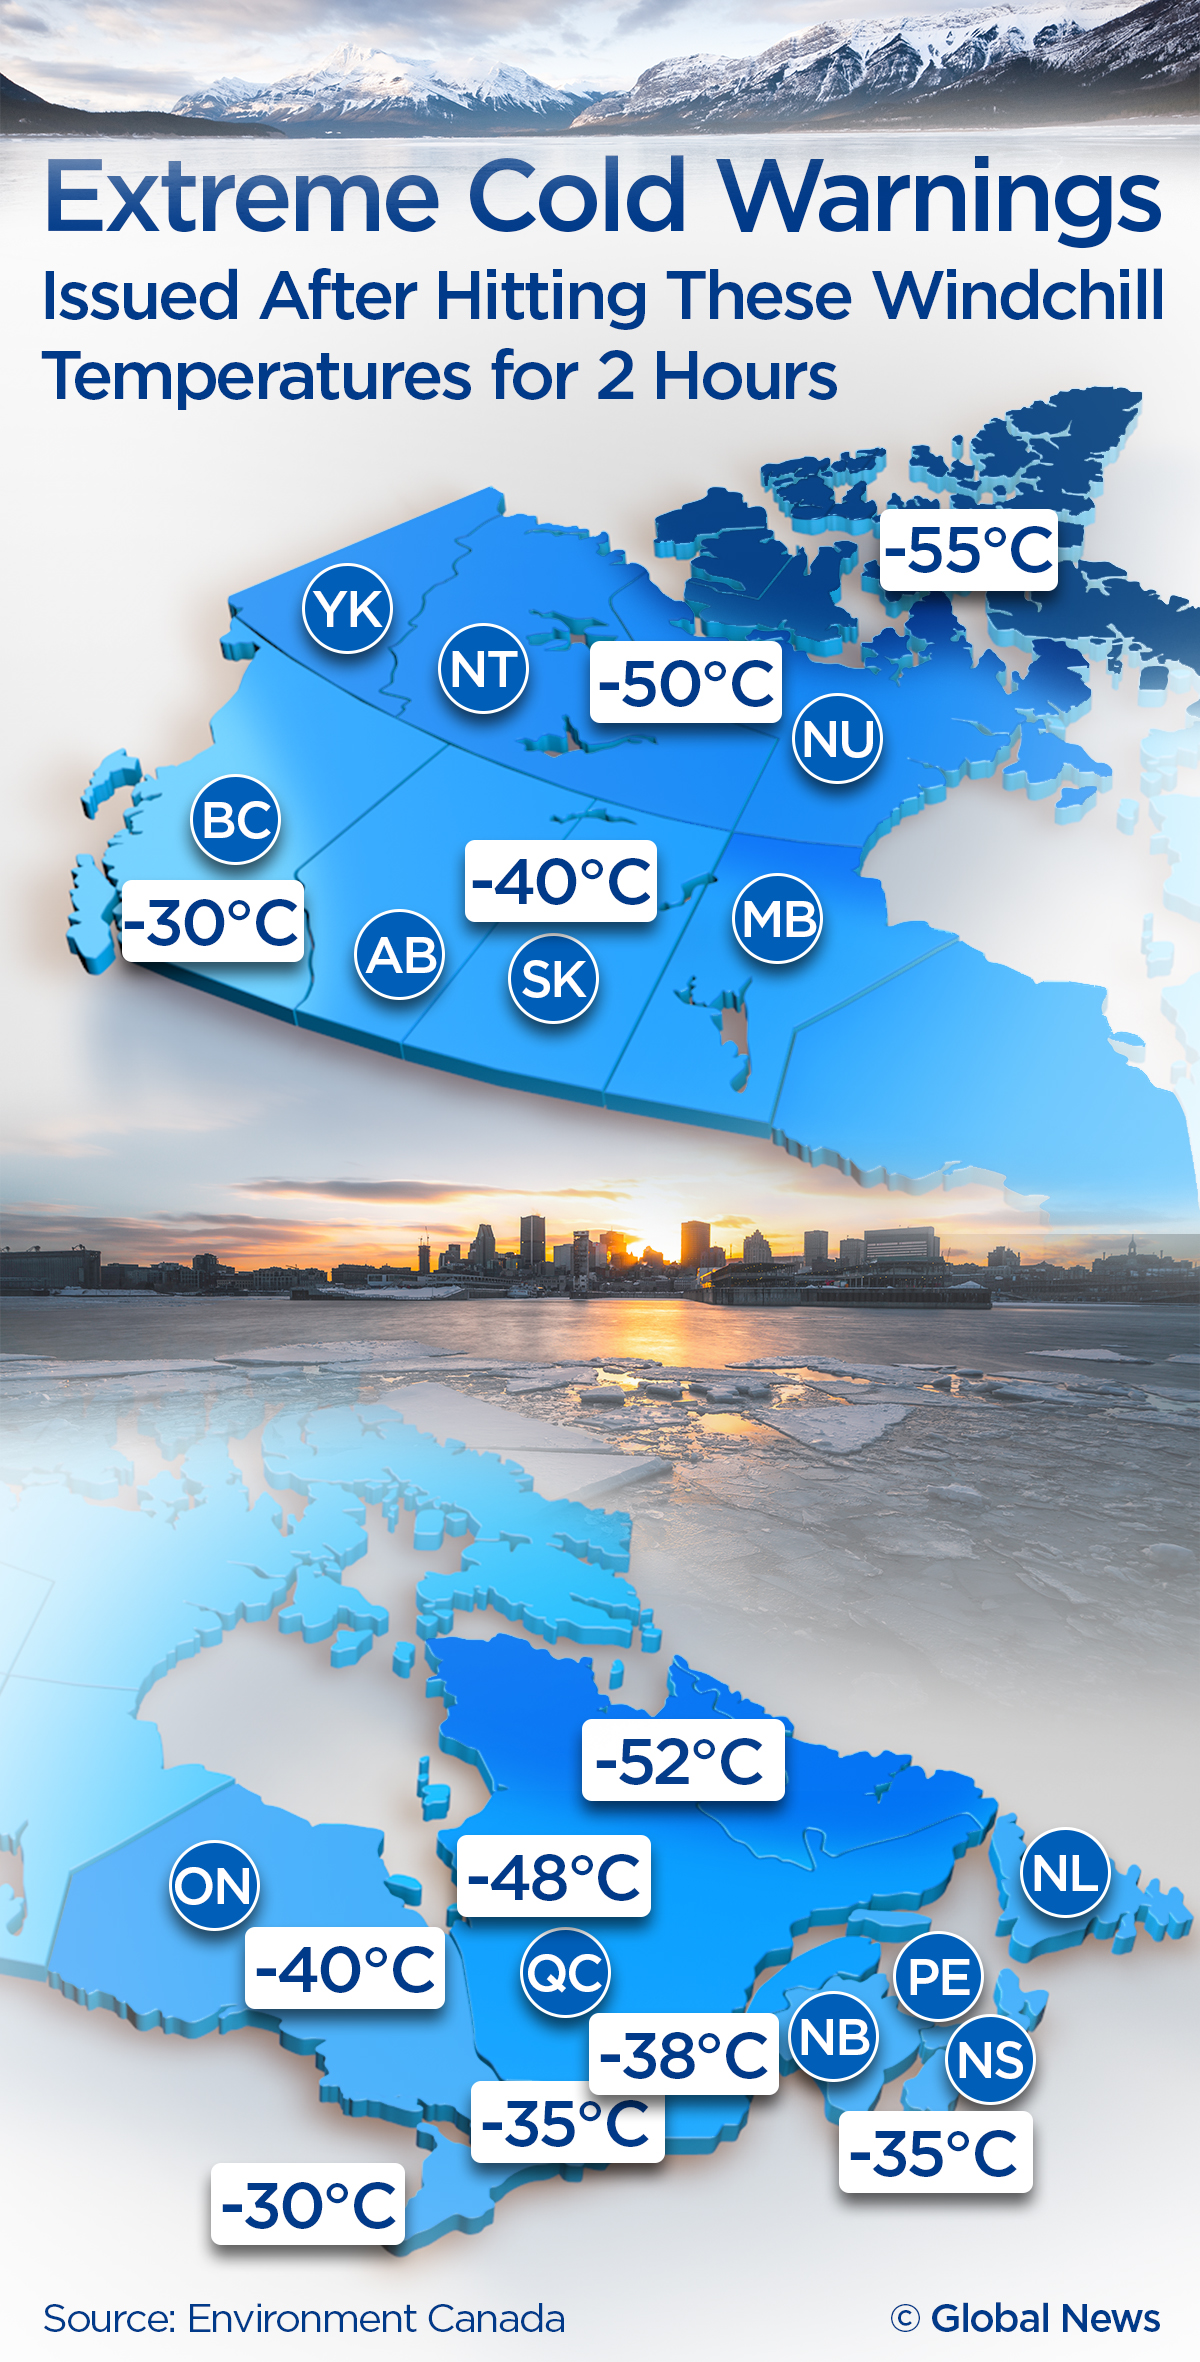 https://globalnews.ca/wp-content/uploads/2019/02/cross-canada-extreme-cold-warning-criteria.jpg?quality=85&strip=all&w=1200